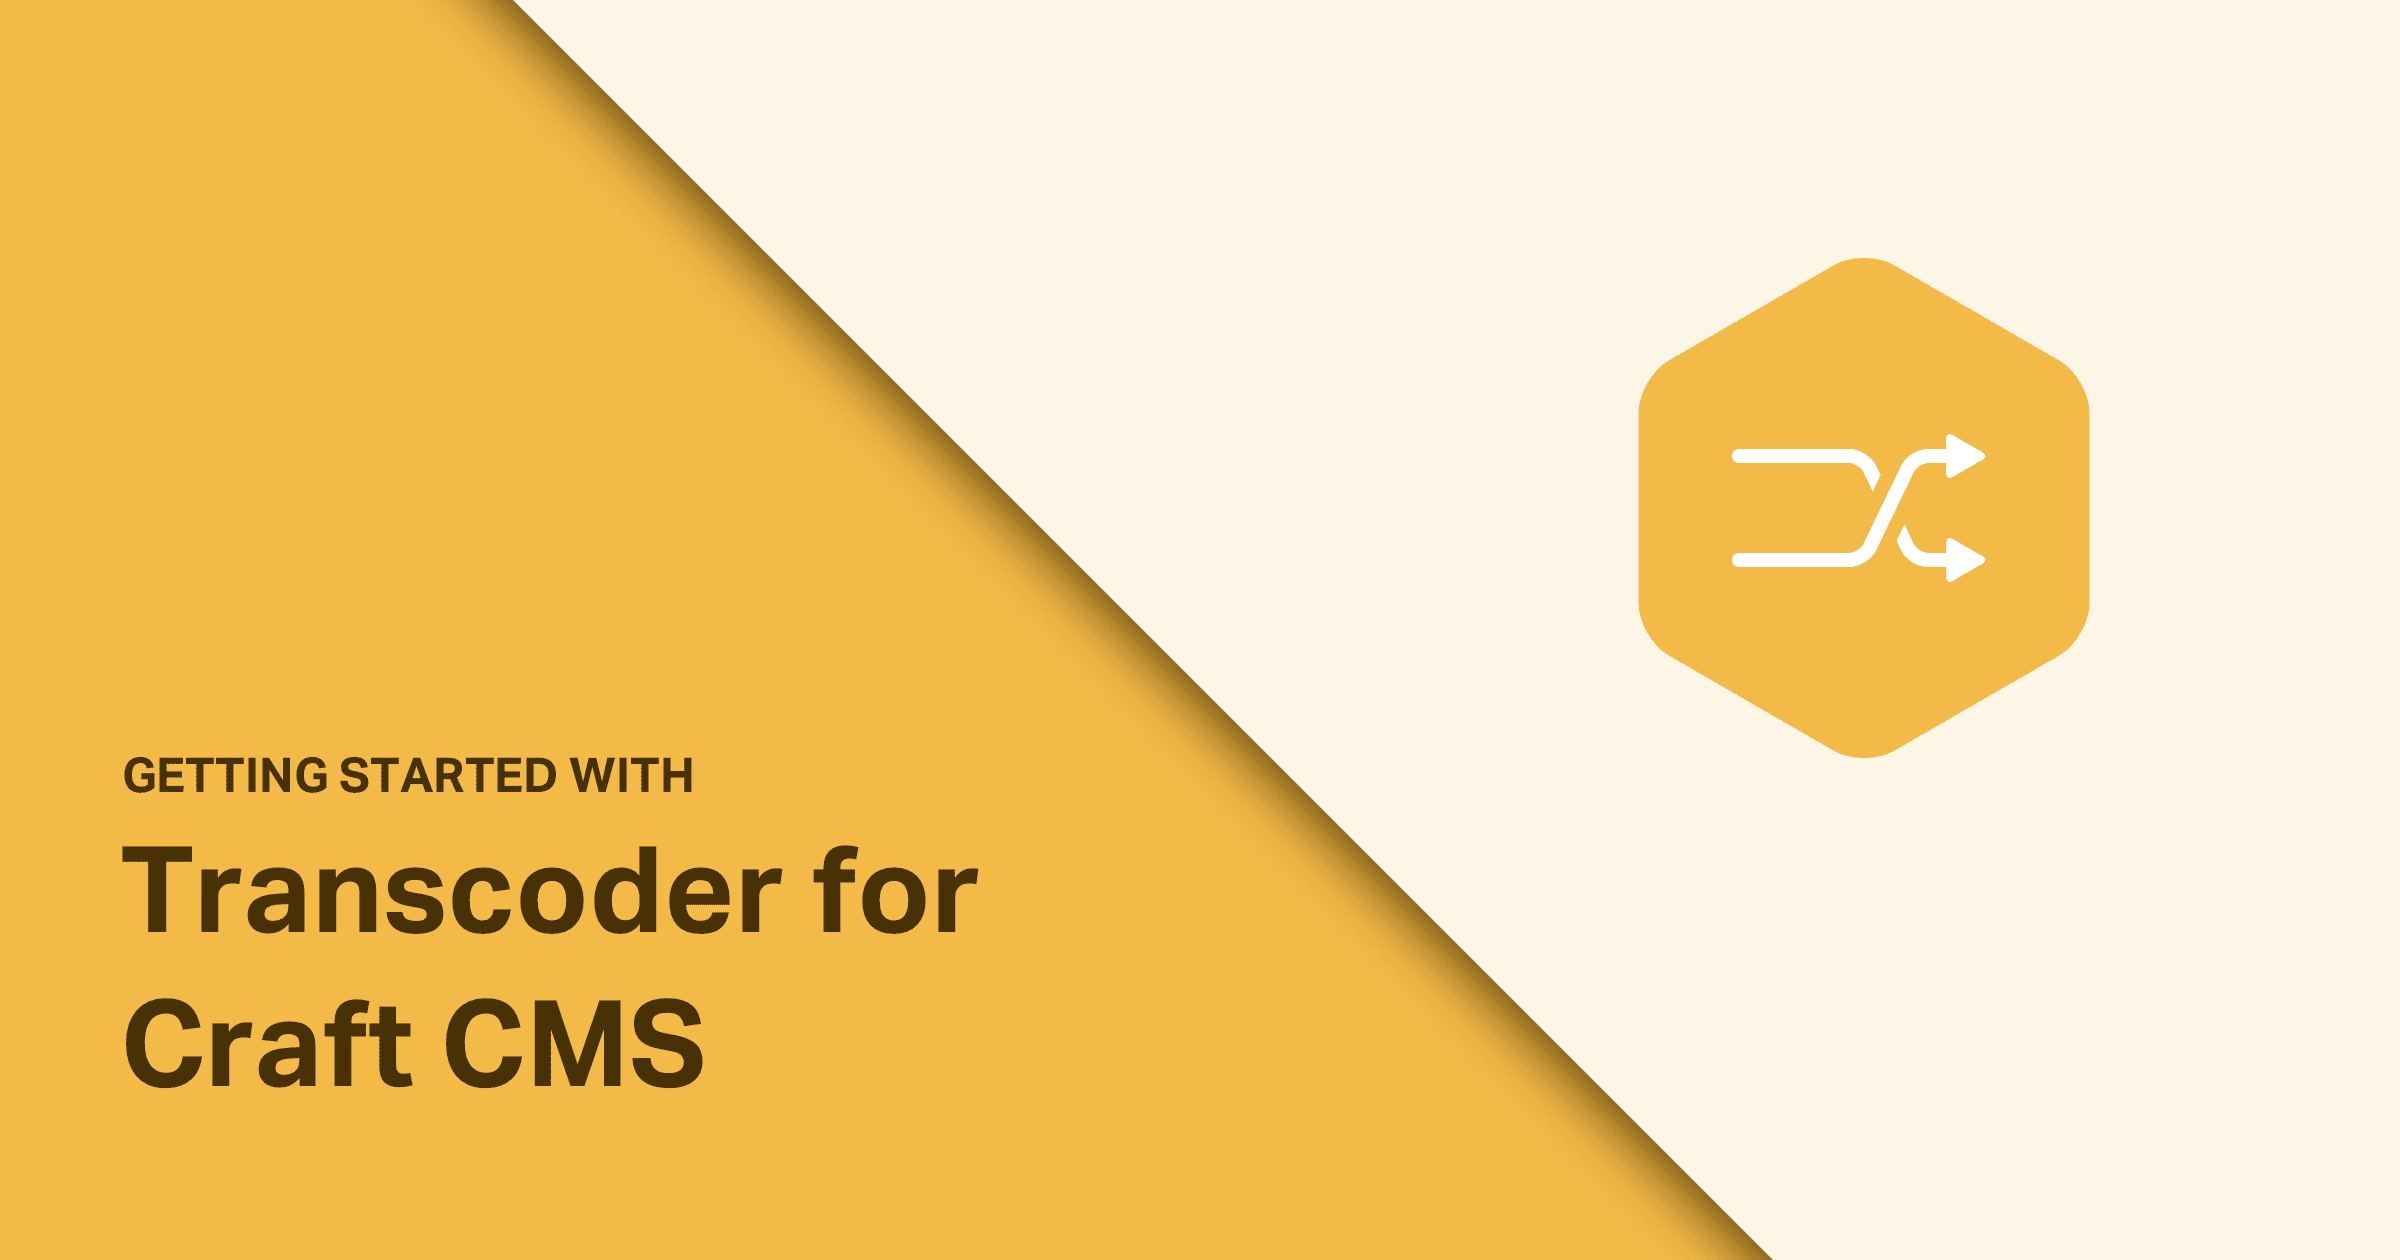 Getting started with Transcoder for Craft CMS